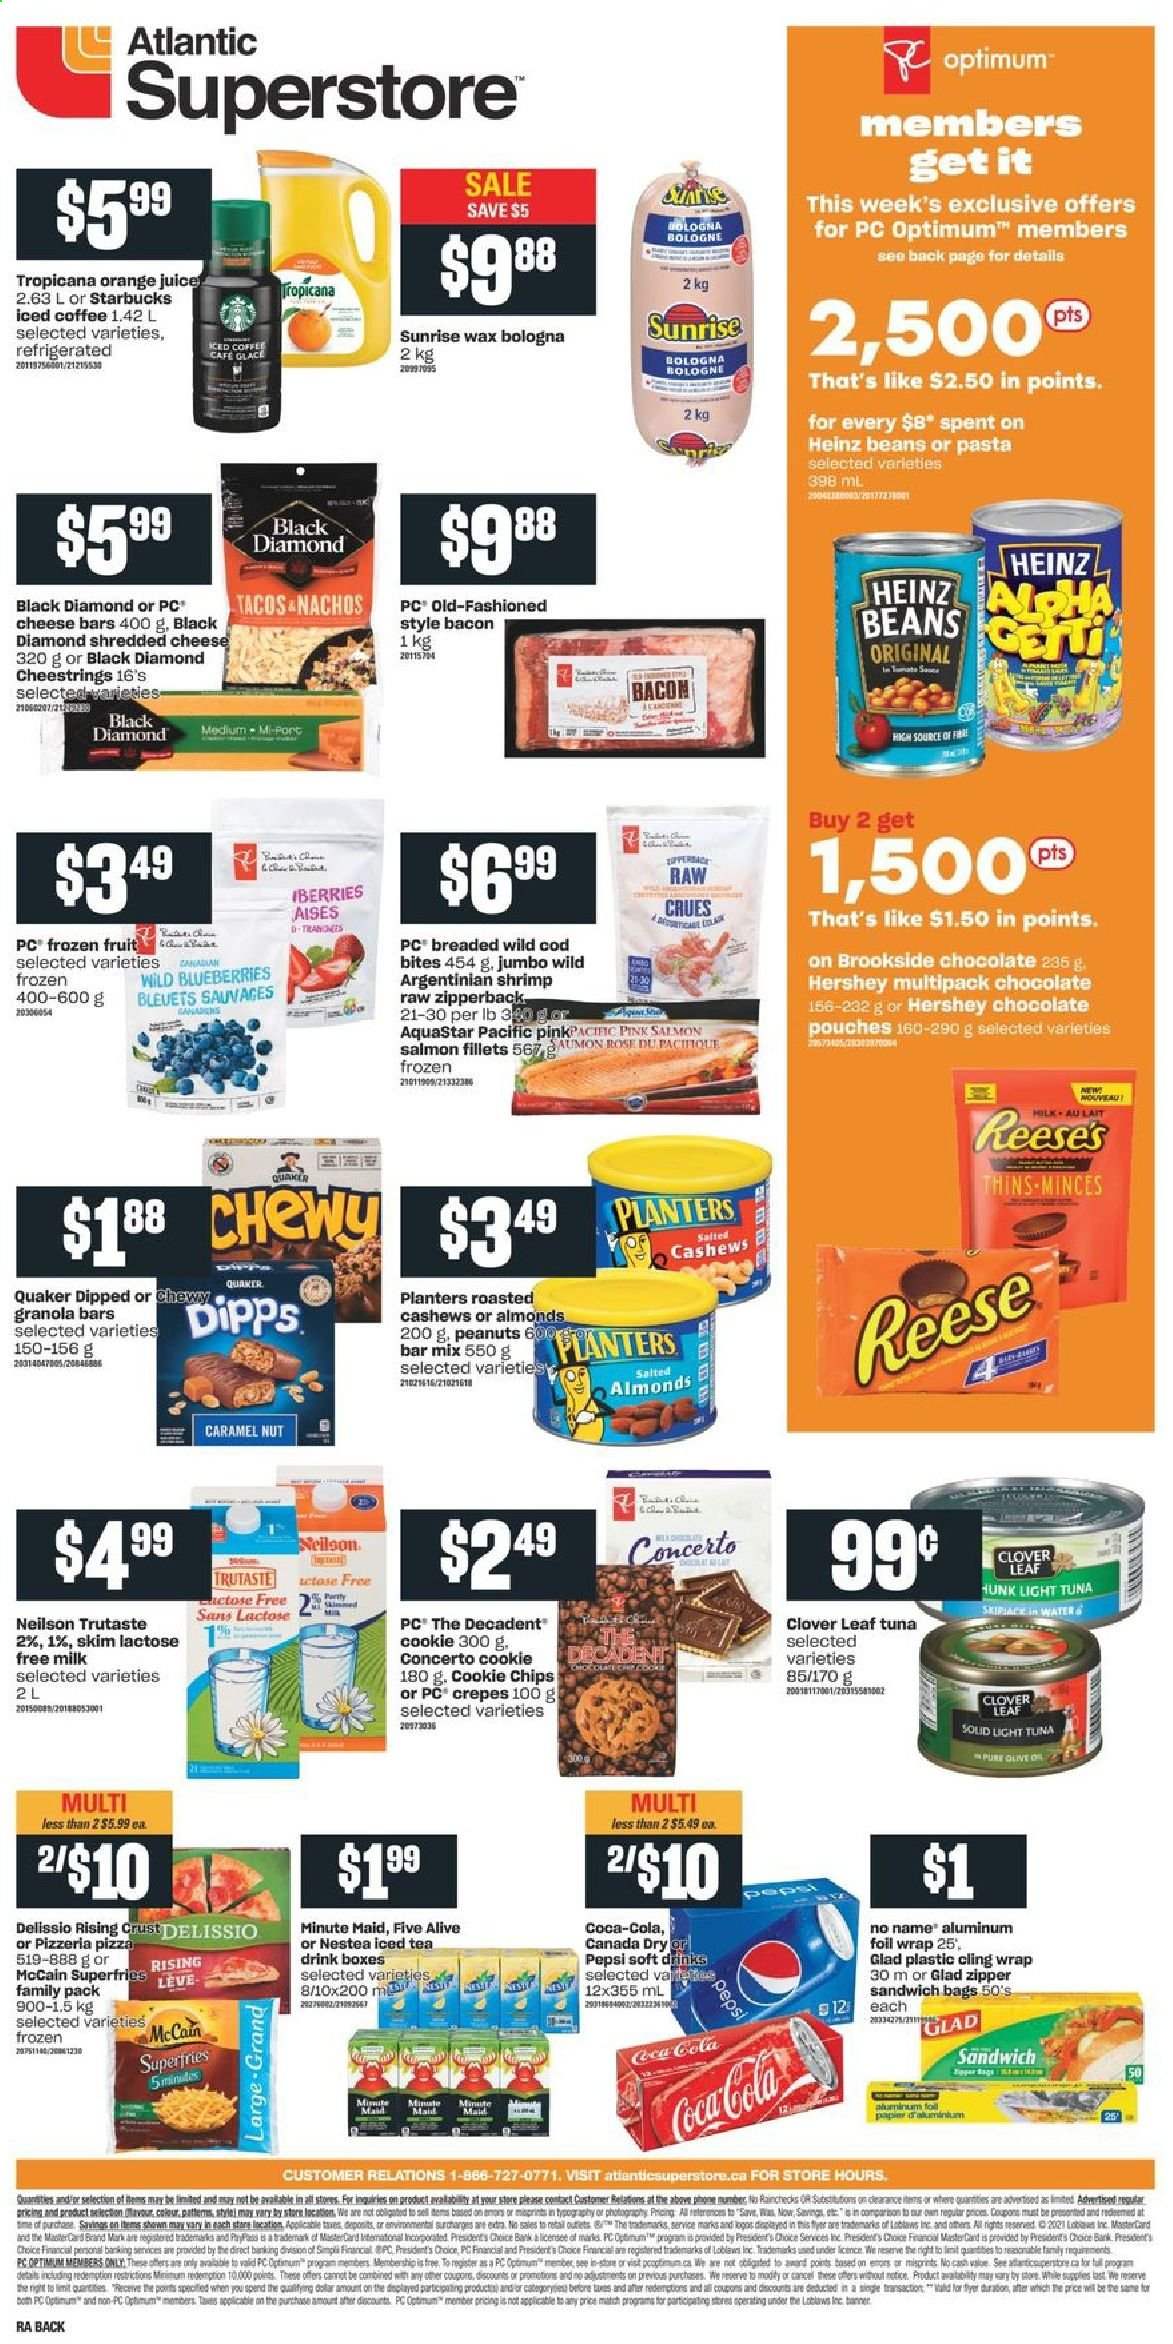 thumbnail - Atlantic Superstore Flyer - January 07, 2021 - January 13, 2021 - Sales products - pie, tacos, blueberries, cod, salmon, salmon fillet, tuna, shrimps, No Name, pizza, Quaker, bacon, bologna sausage, shredded cheese, string cheese, Président, Clover, milk, lactose free milk, Reese's, McCain, potato fries, chocolate, Thins, Heinz, light tuna, granola bar, caramel, almonds, cashews, peanuts, Planters, Canada Dry, Coca-Cola, Pepsi, orange juice, juice, ice tea, soft drink, fruit punch, iced coffee, L'Or, Starbucks, wine, rosé wine, bag, Optimum, rose. Page 2.